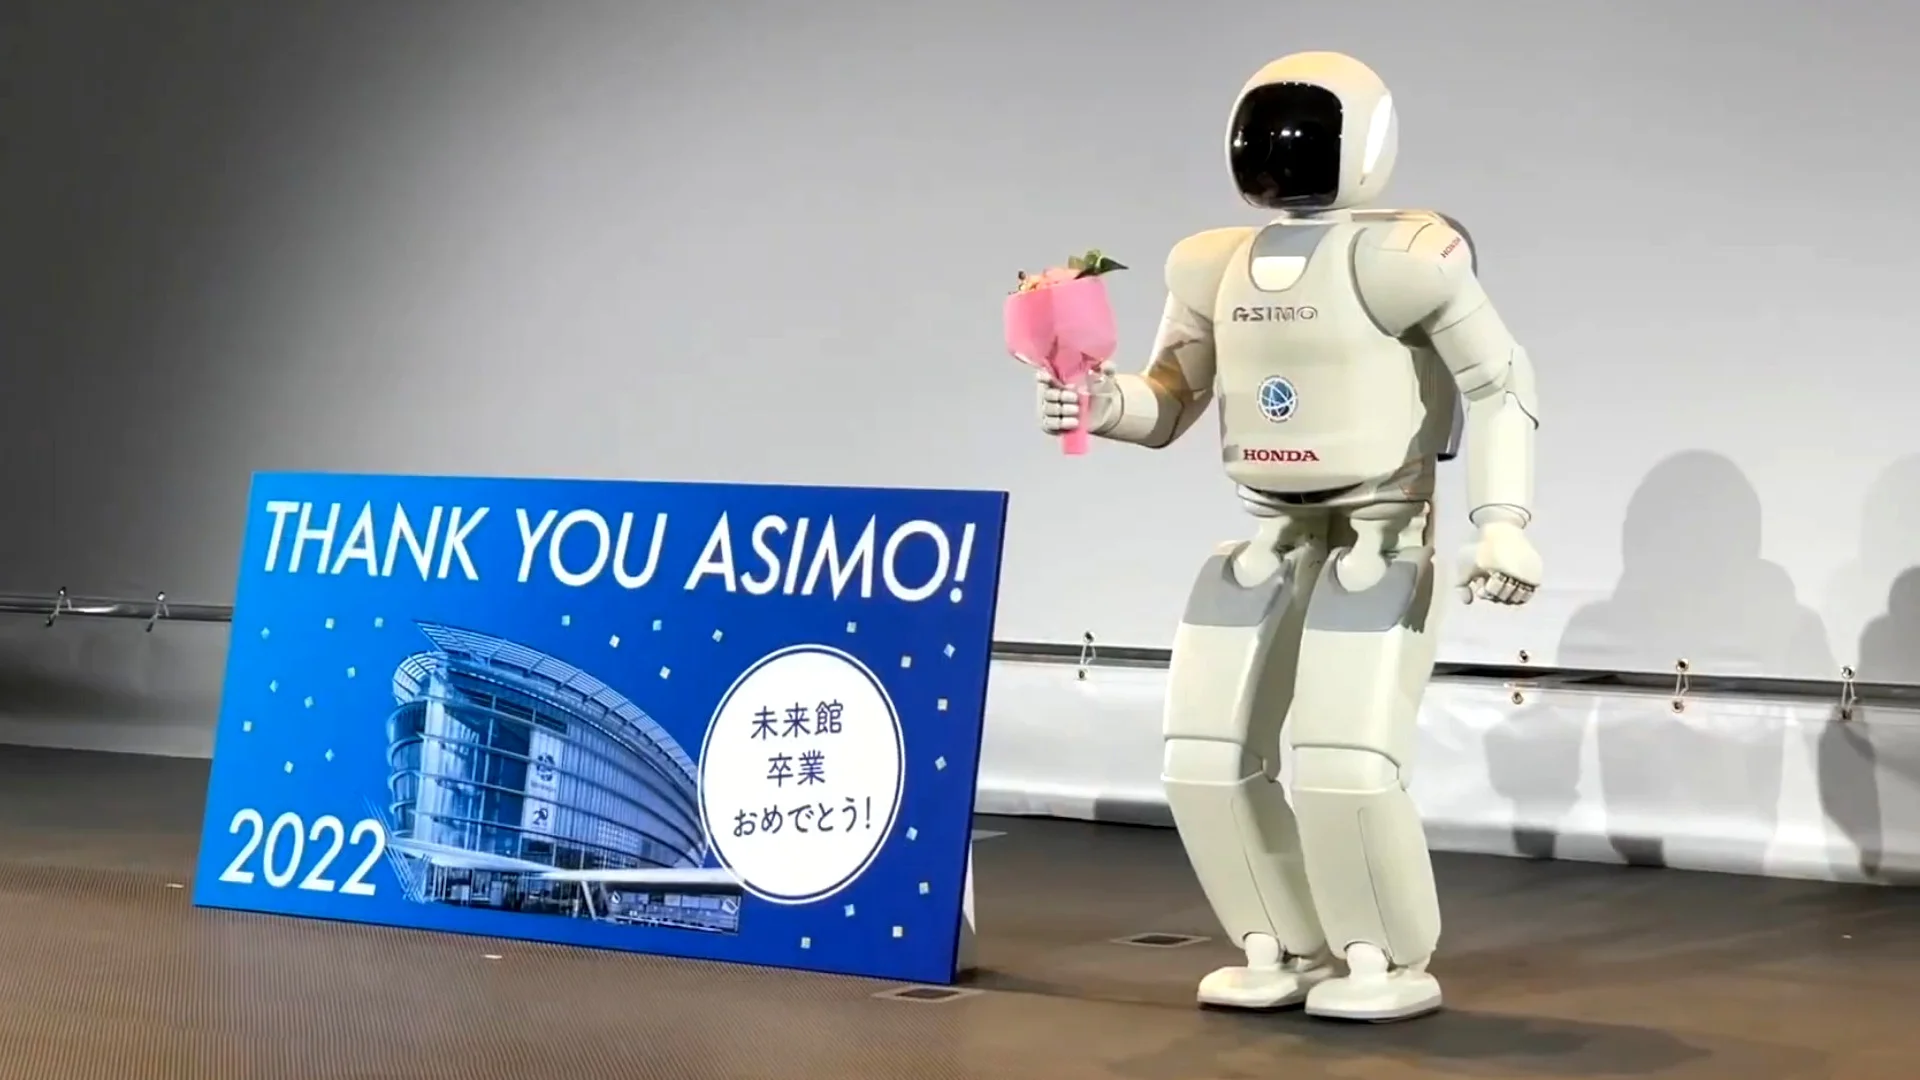 End of ASIMO project